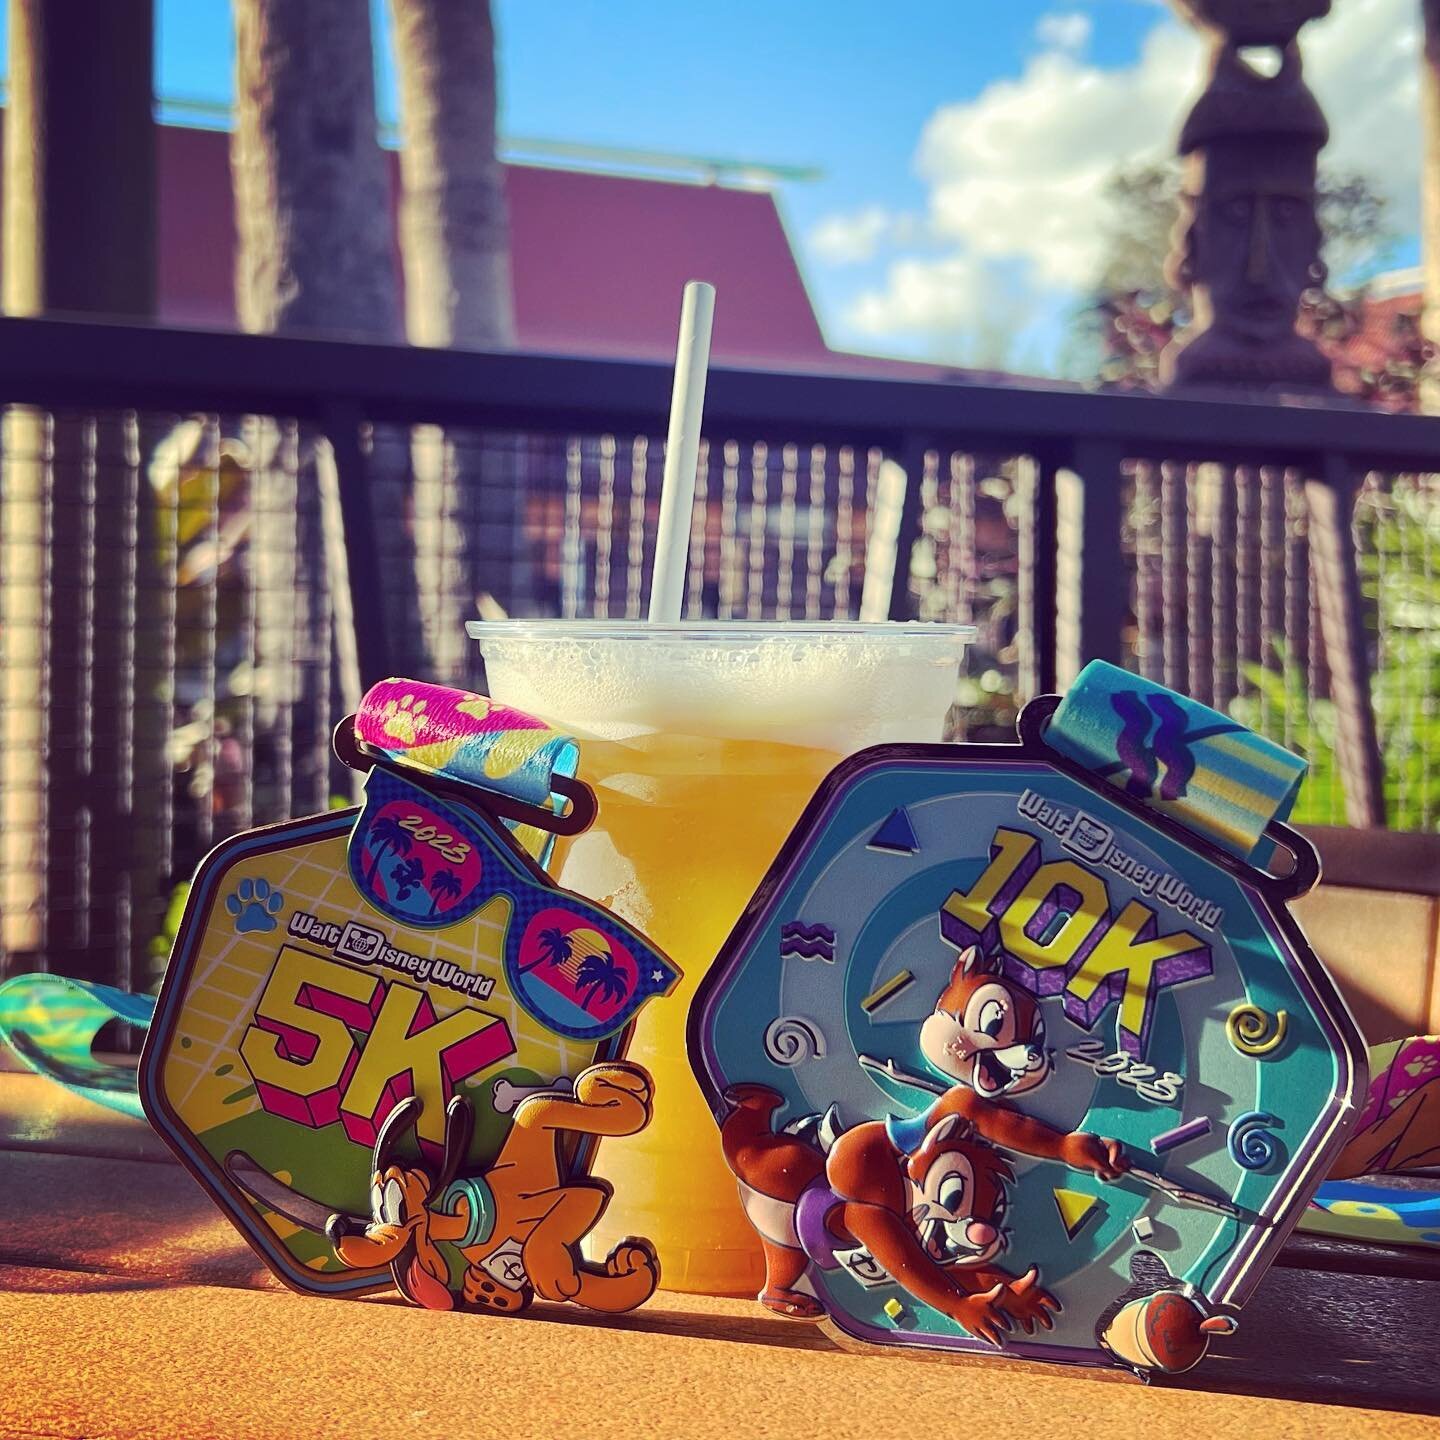 Celebrating another successful #rundisney weekend with drinks at my favourite resort we never get to stay at. I can&rsquo;t believe it&rsquo;s our first US RunDisney event in 5 years. The medals for this event are absolute 🔥 tho.

#medalmonday #disn